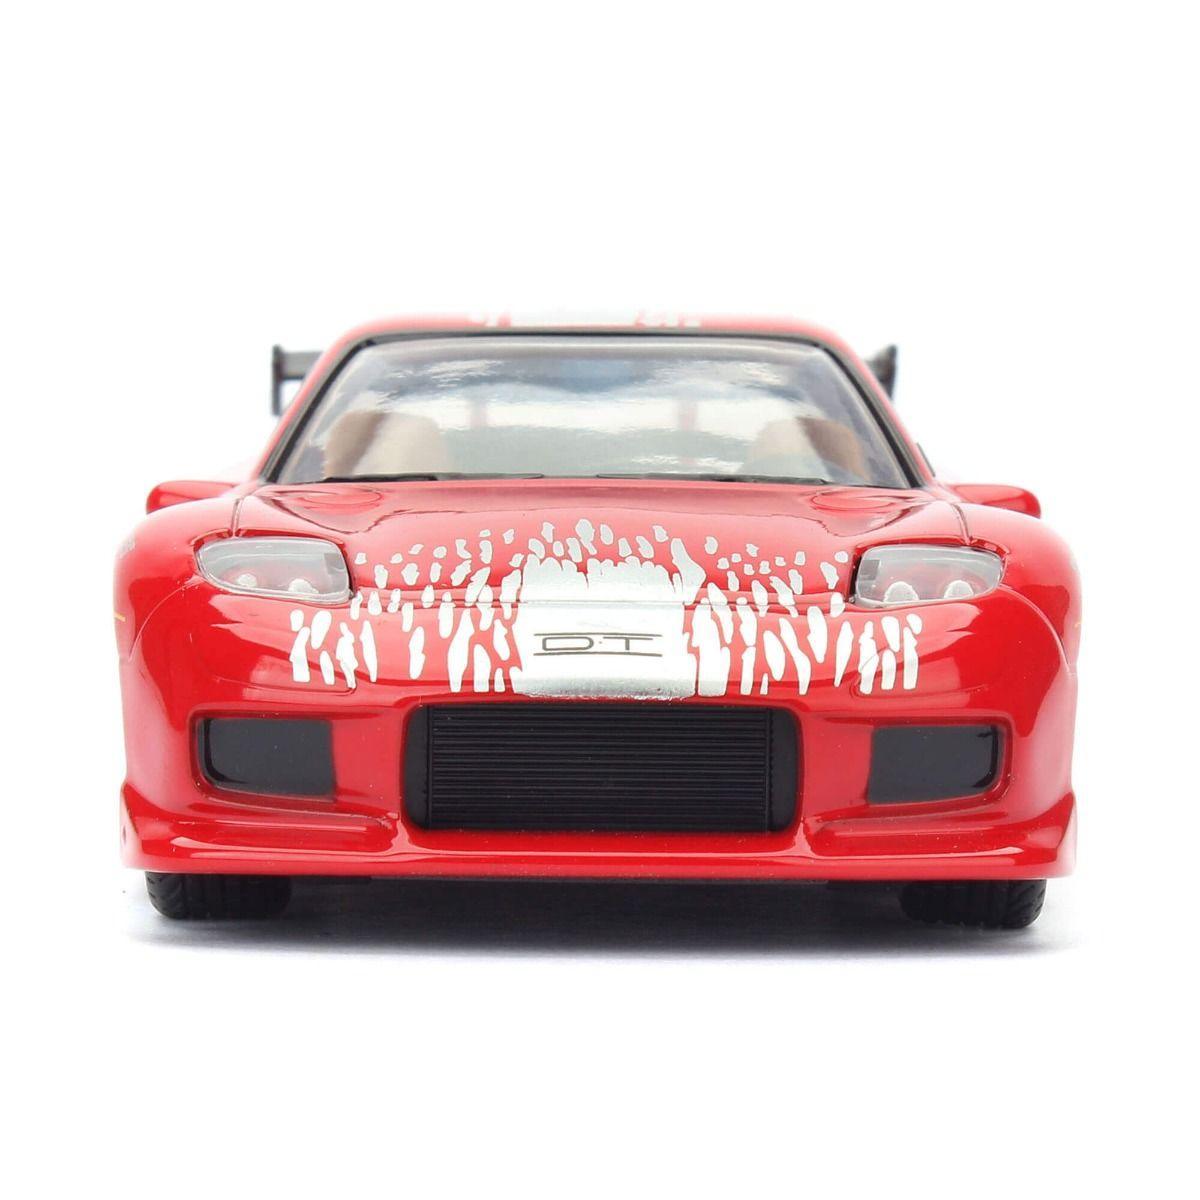 JAD98377 Fast and Furious - Dom's Mazda RX-7 1:32 Scale Hollywood Ride - Jada Toys - Titan Pop Culture